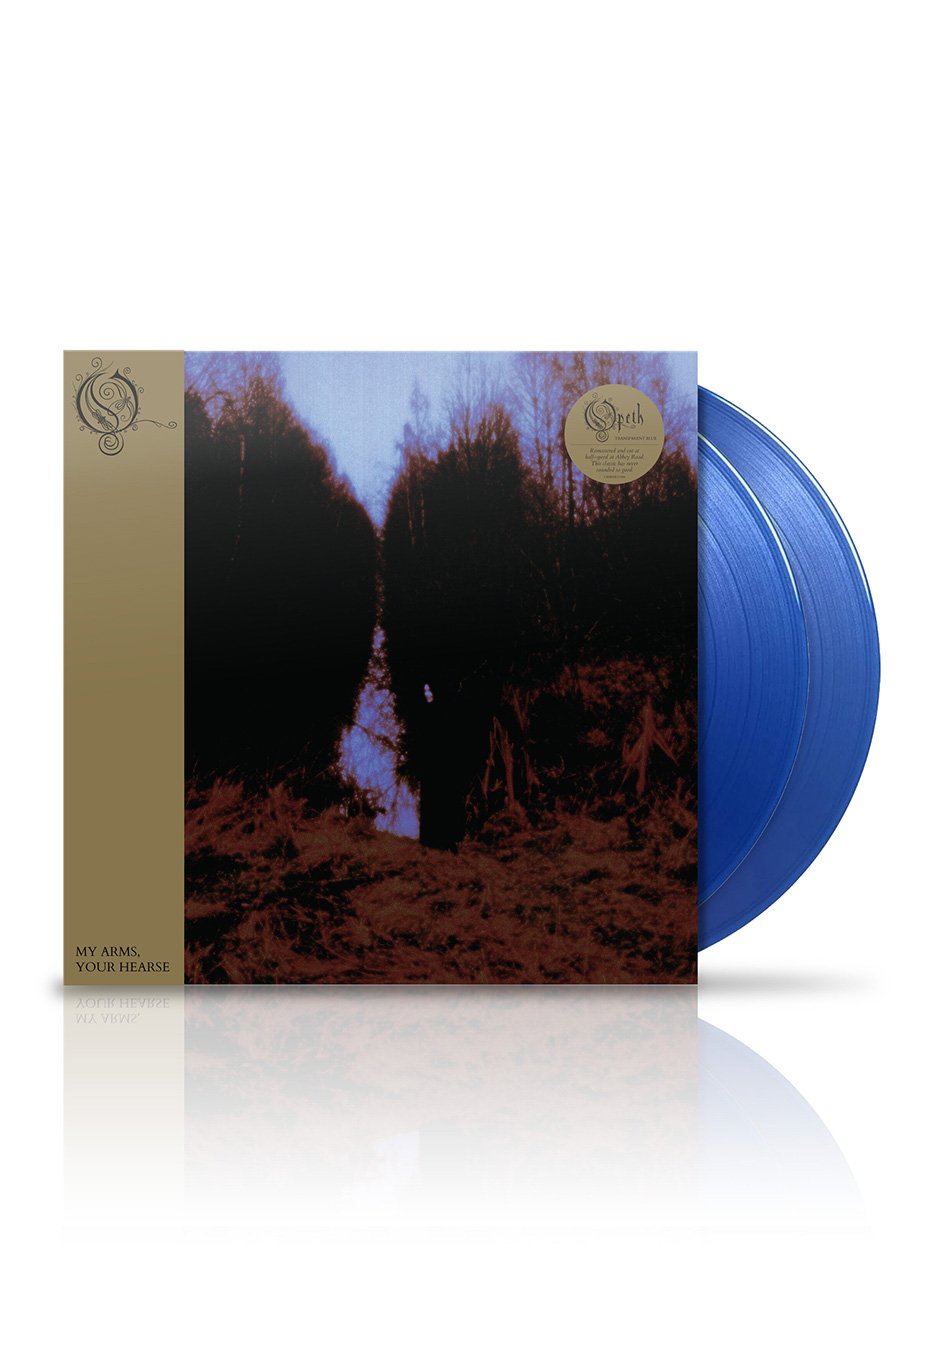 Opeth - My Arms Your Hearse Ltd. Blue - Colored 2 Vinyl